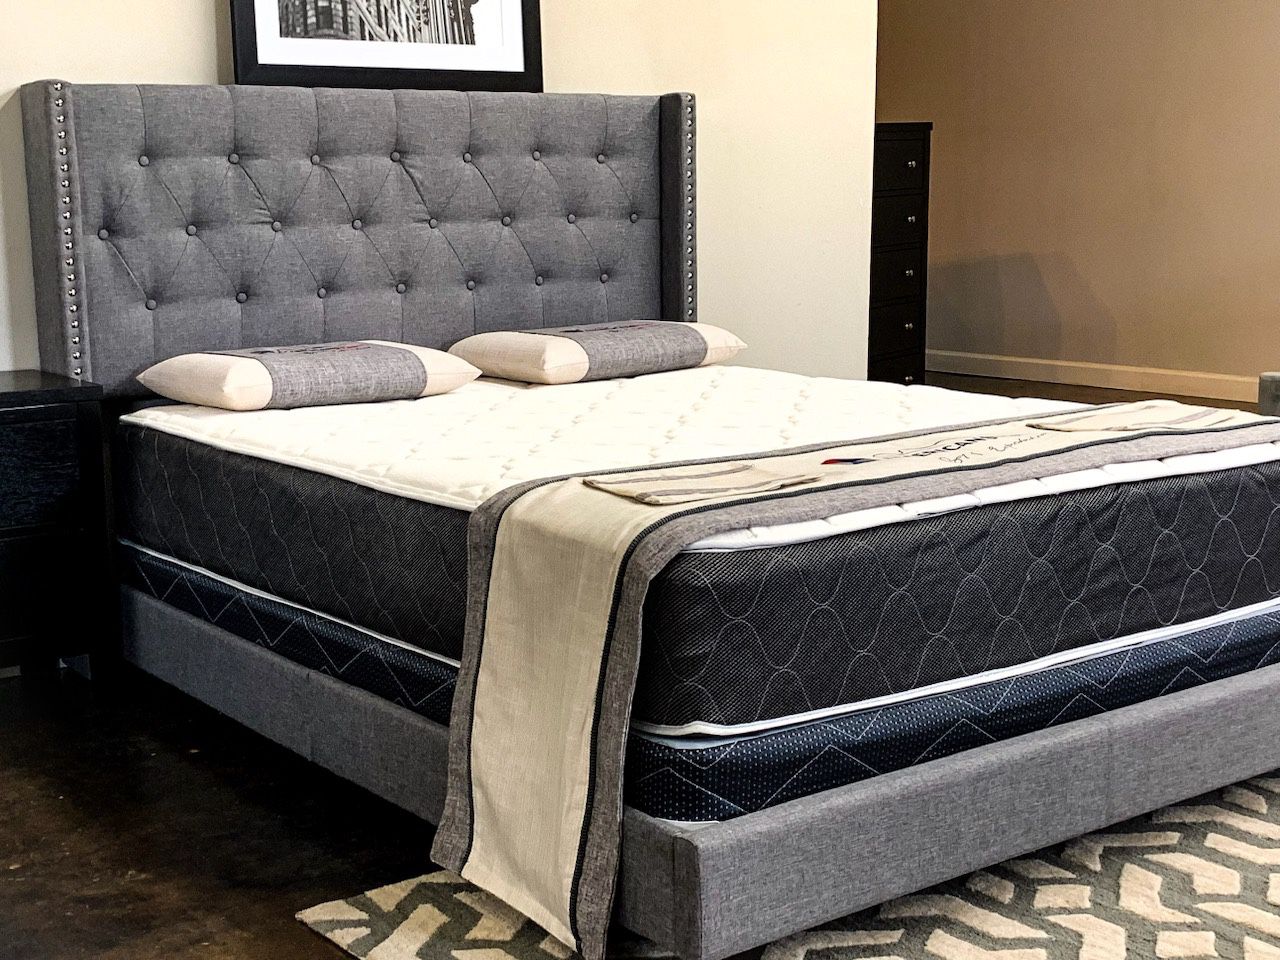 Full Gray Nailhead Bed With Plush Mattress And Box Spring (SE HABLA ESPAÑOL) Free Delivery